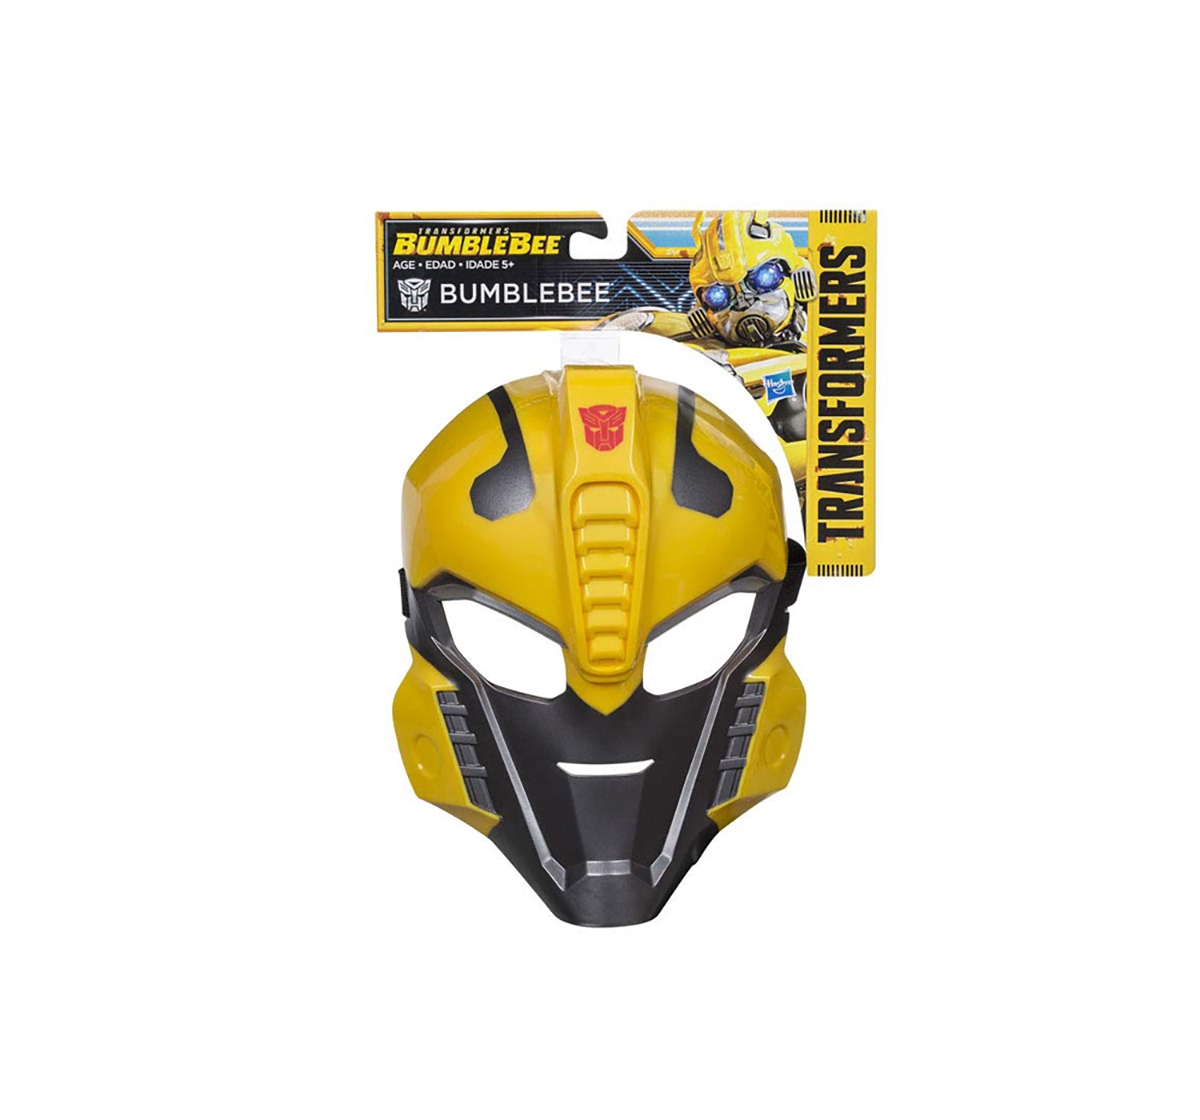 Transformers | Transformers Bumblebee Mask Action Figure Play Sets for Kids age 5Y+ 